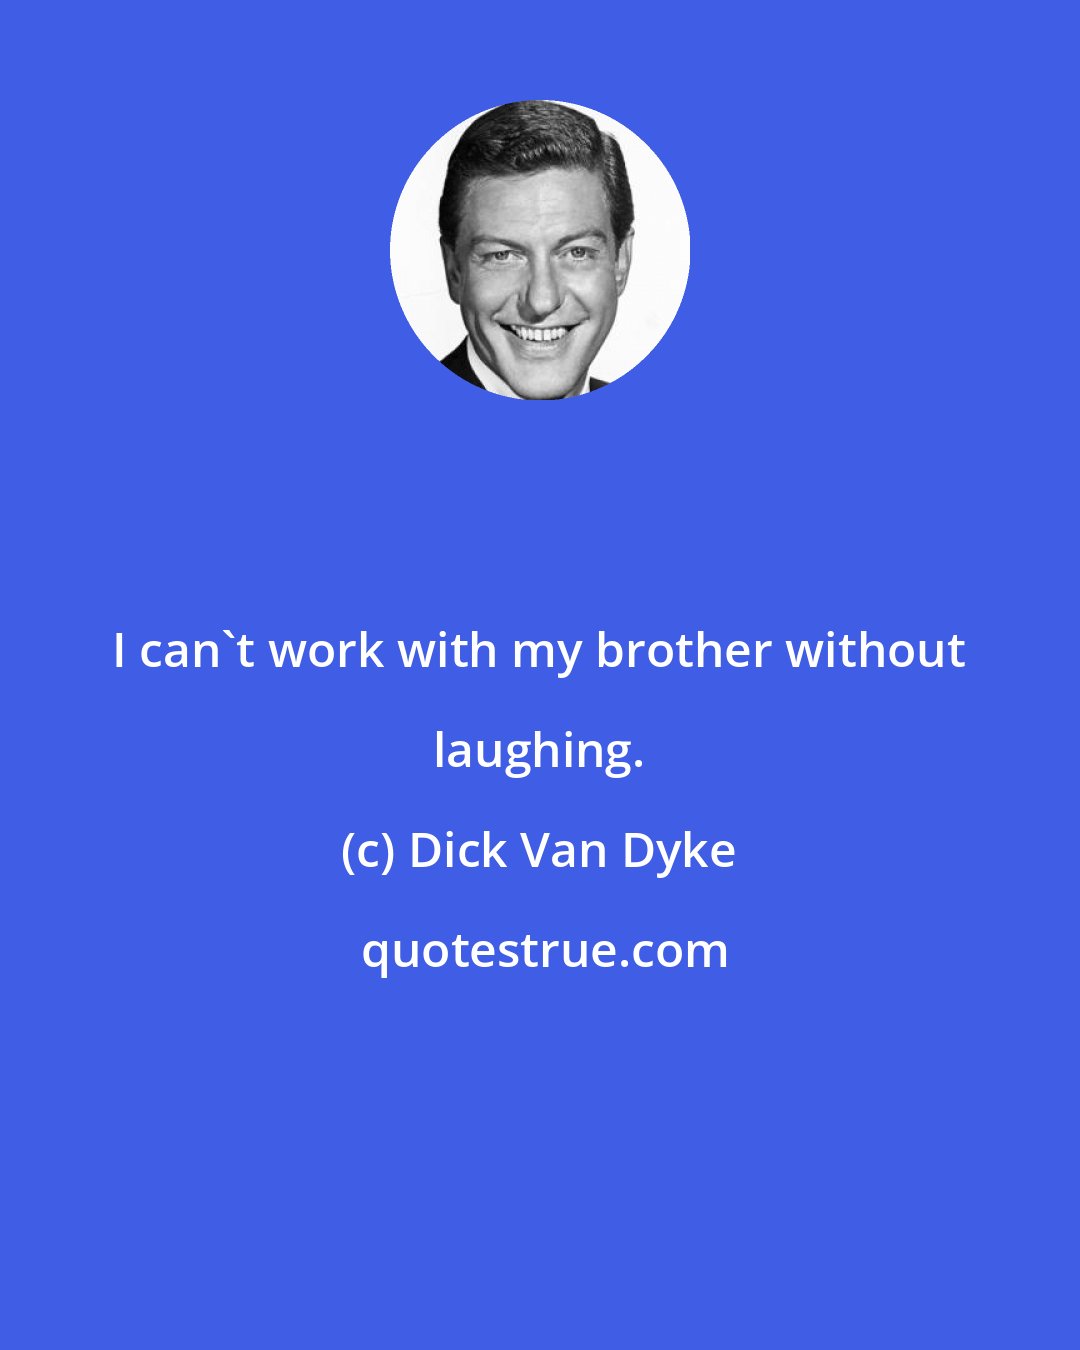 Dick Van Dyke: I can't work with my brother without laughing.